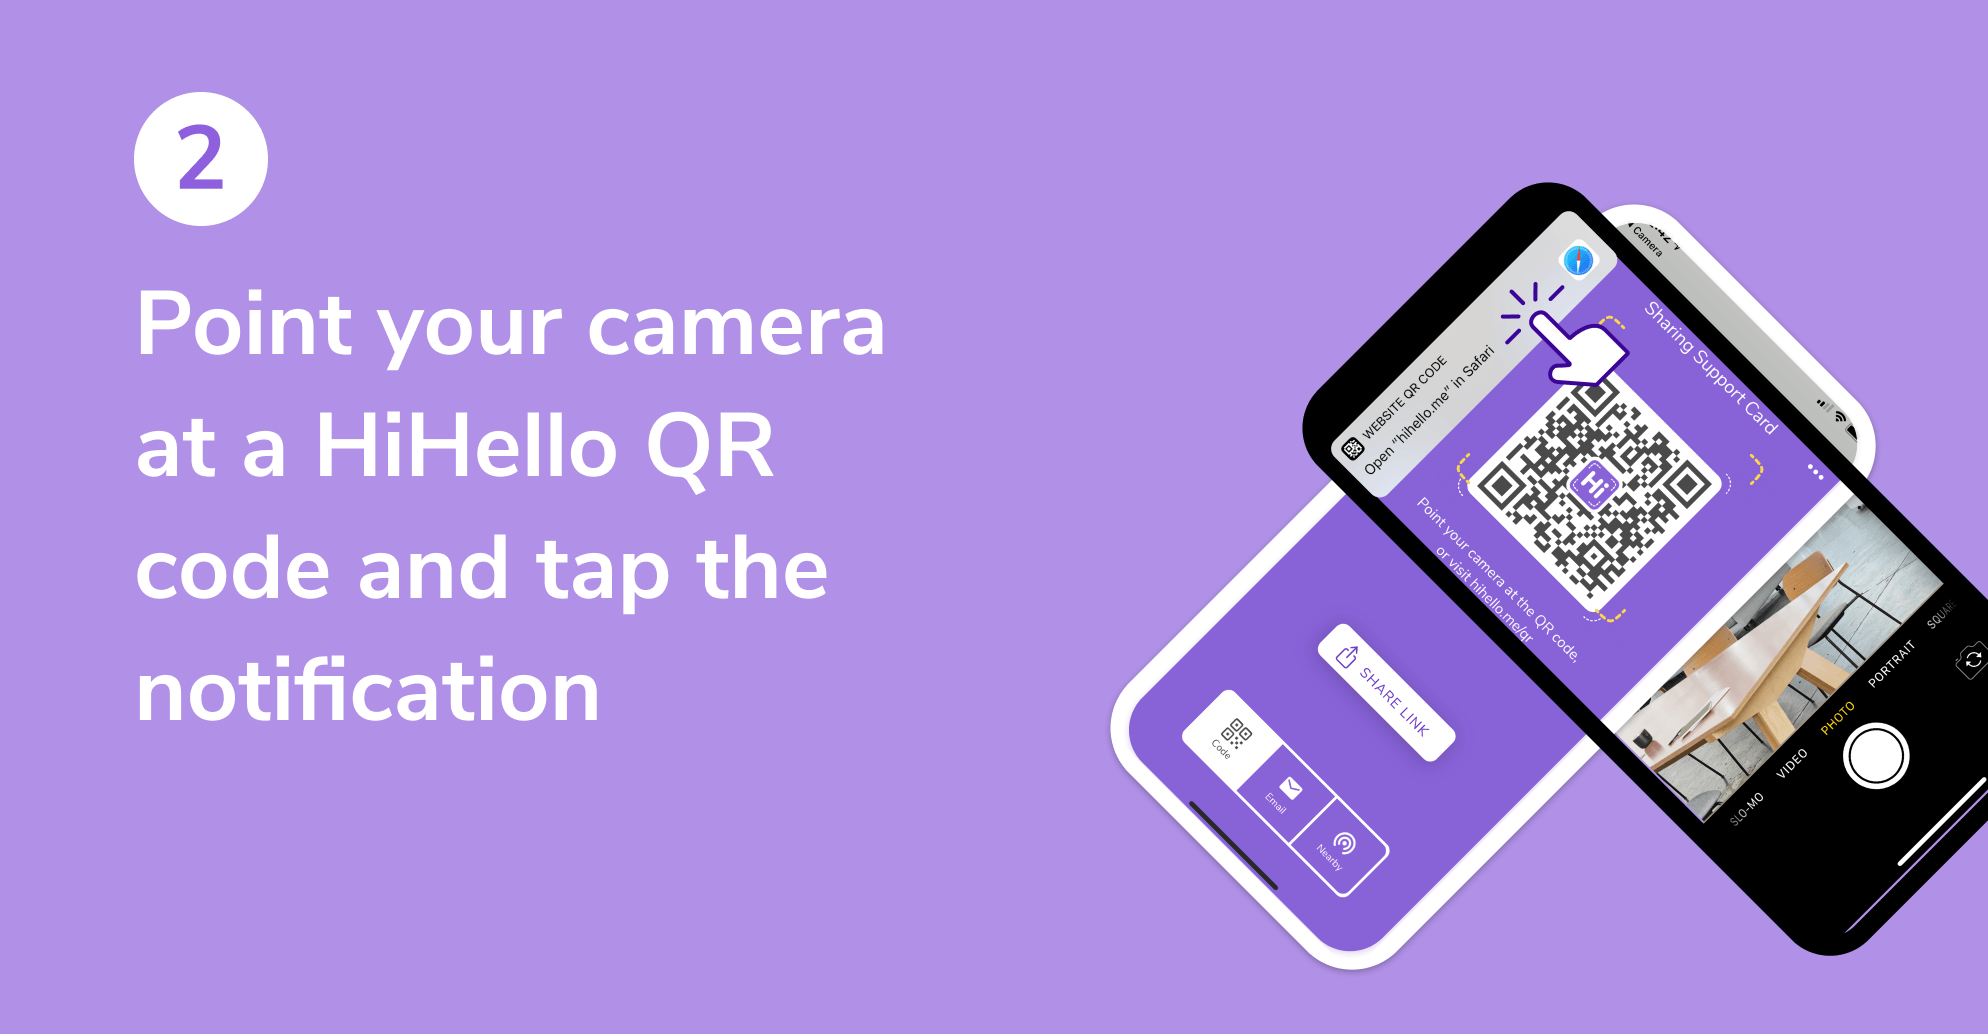 The native Camera app scanning a HiHello QR code on another phone